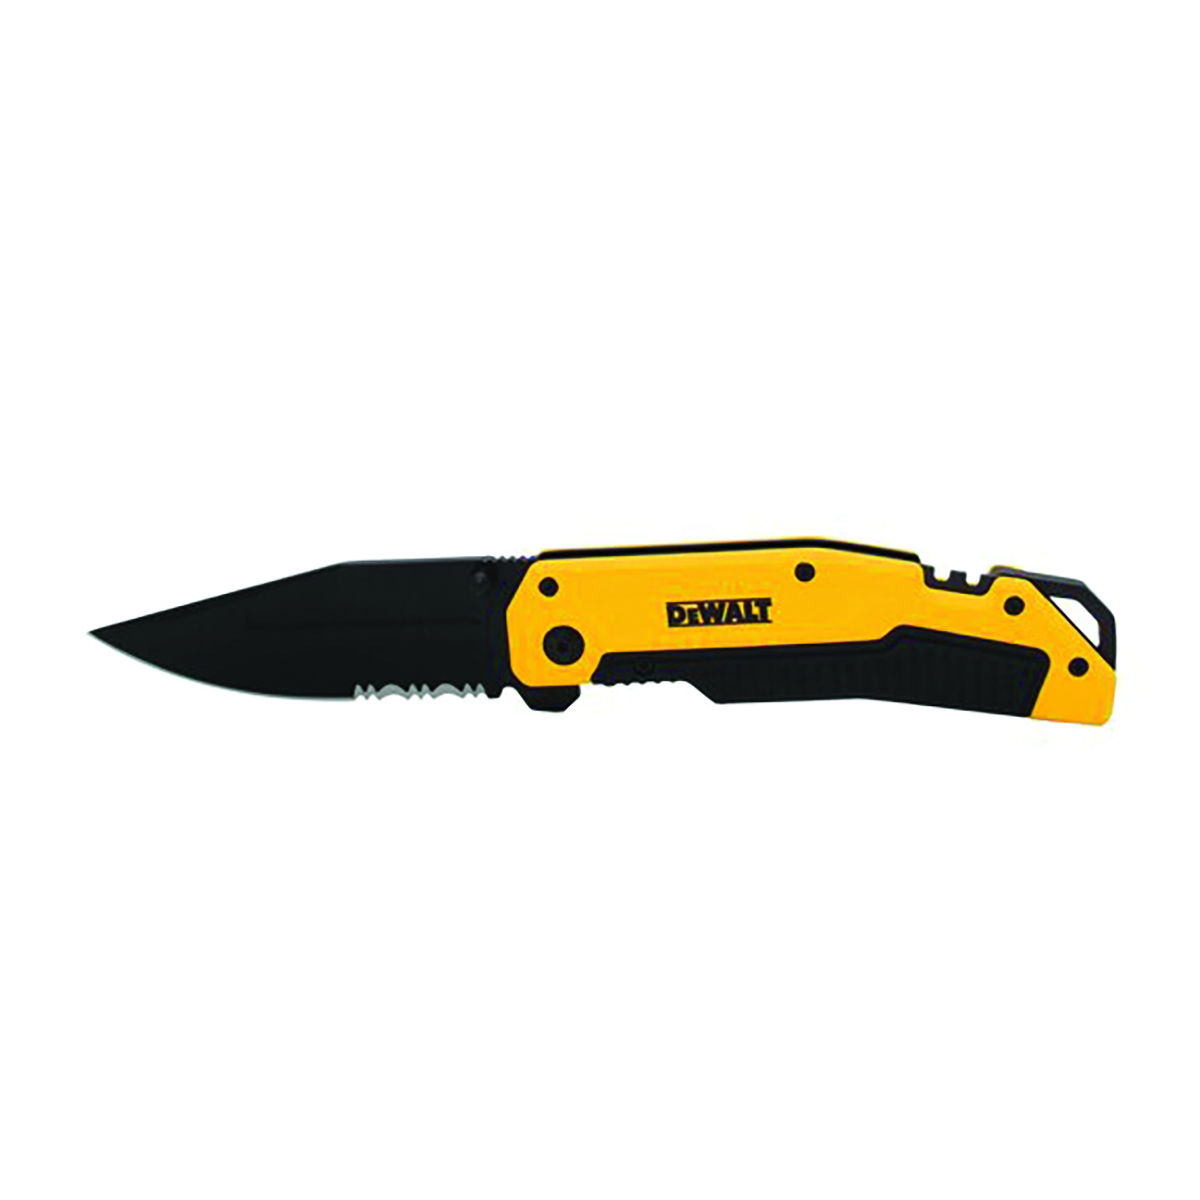 Yellow and black knife with serrated edges and DeWalt logo on the handle. Image by DeWalt.